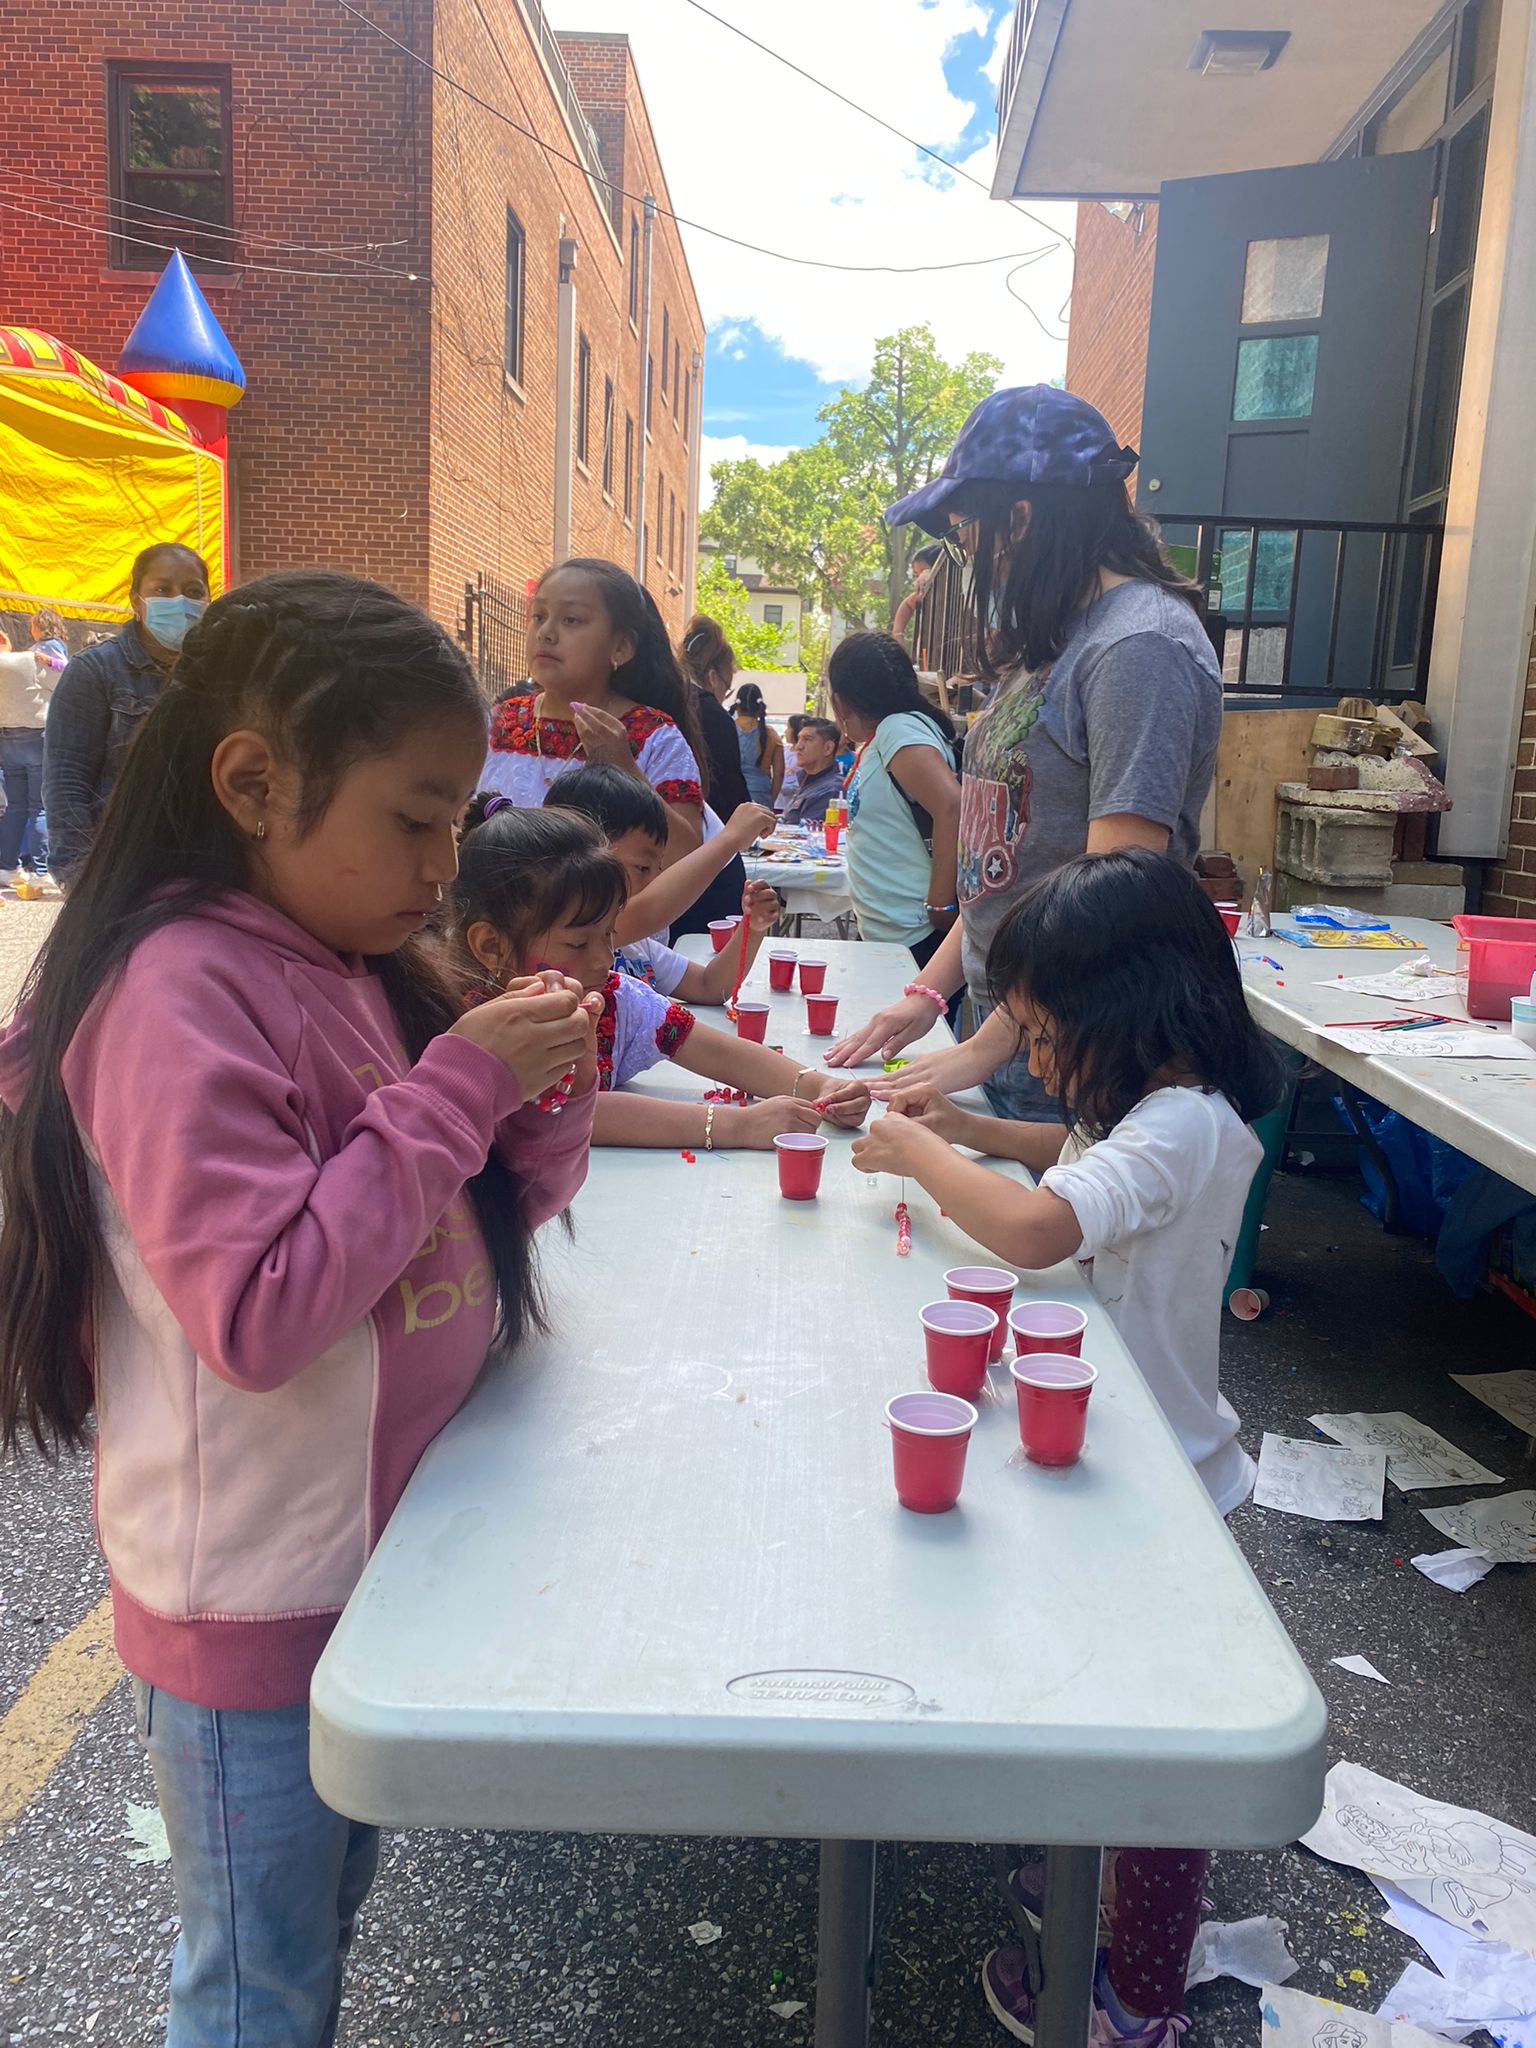 A group of children playing with cups on the table.